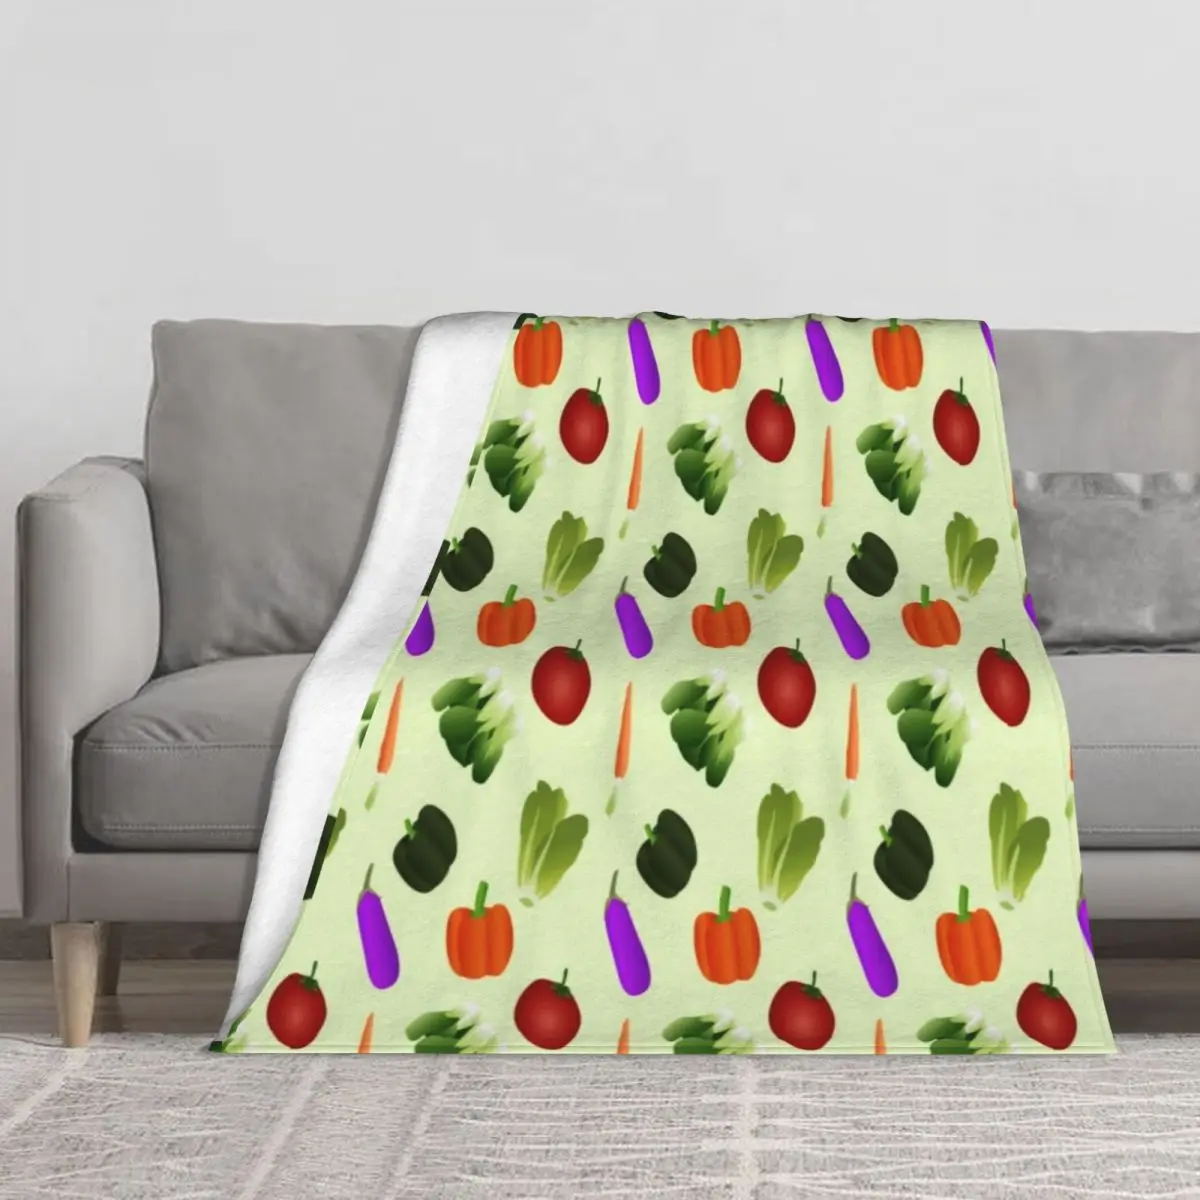 

World Vegetarian Day Blanket Vegetables Print Fluffy Big Thick Throw Blanket Warm On the Bed Blankets